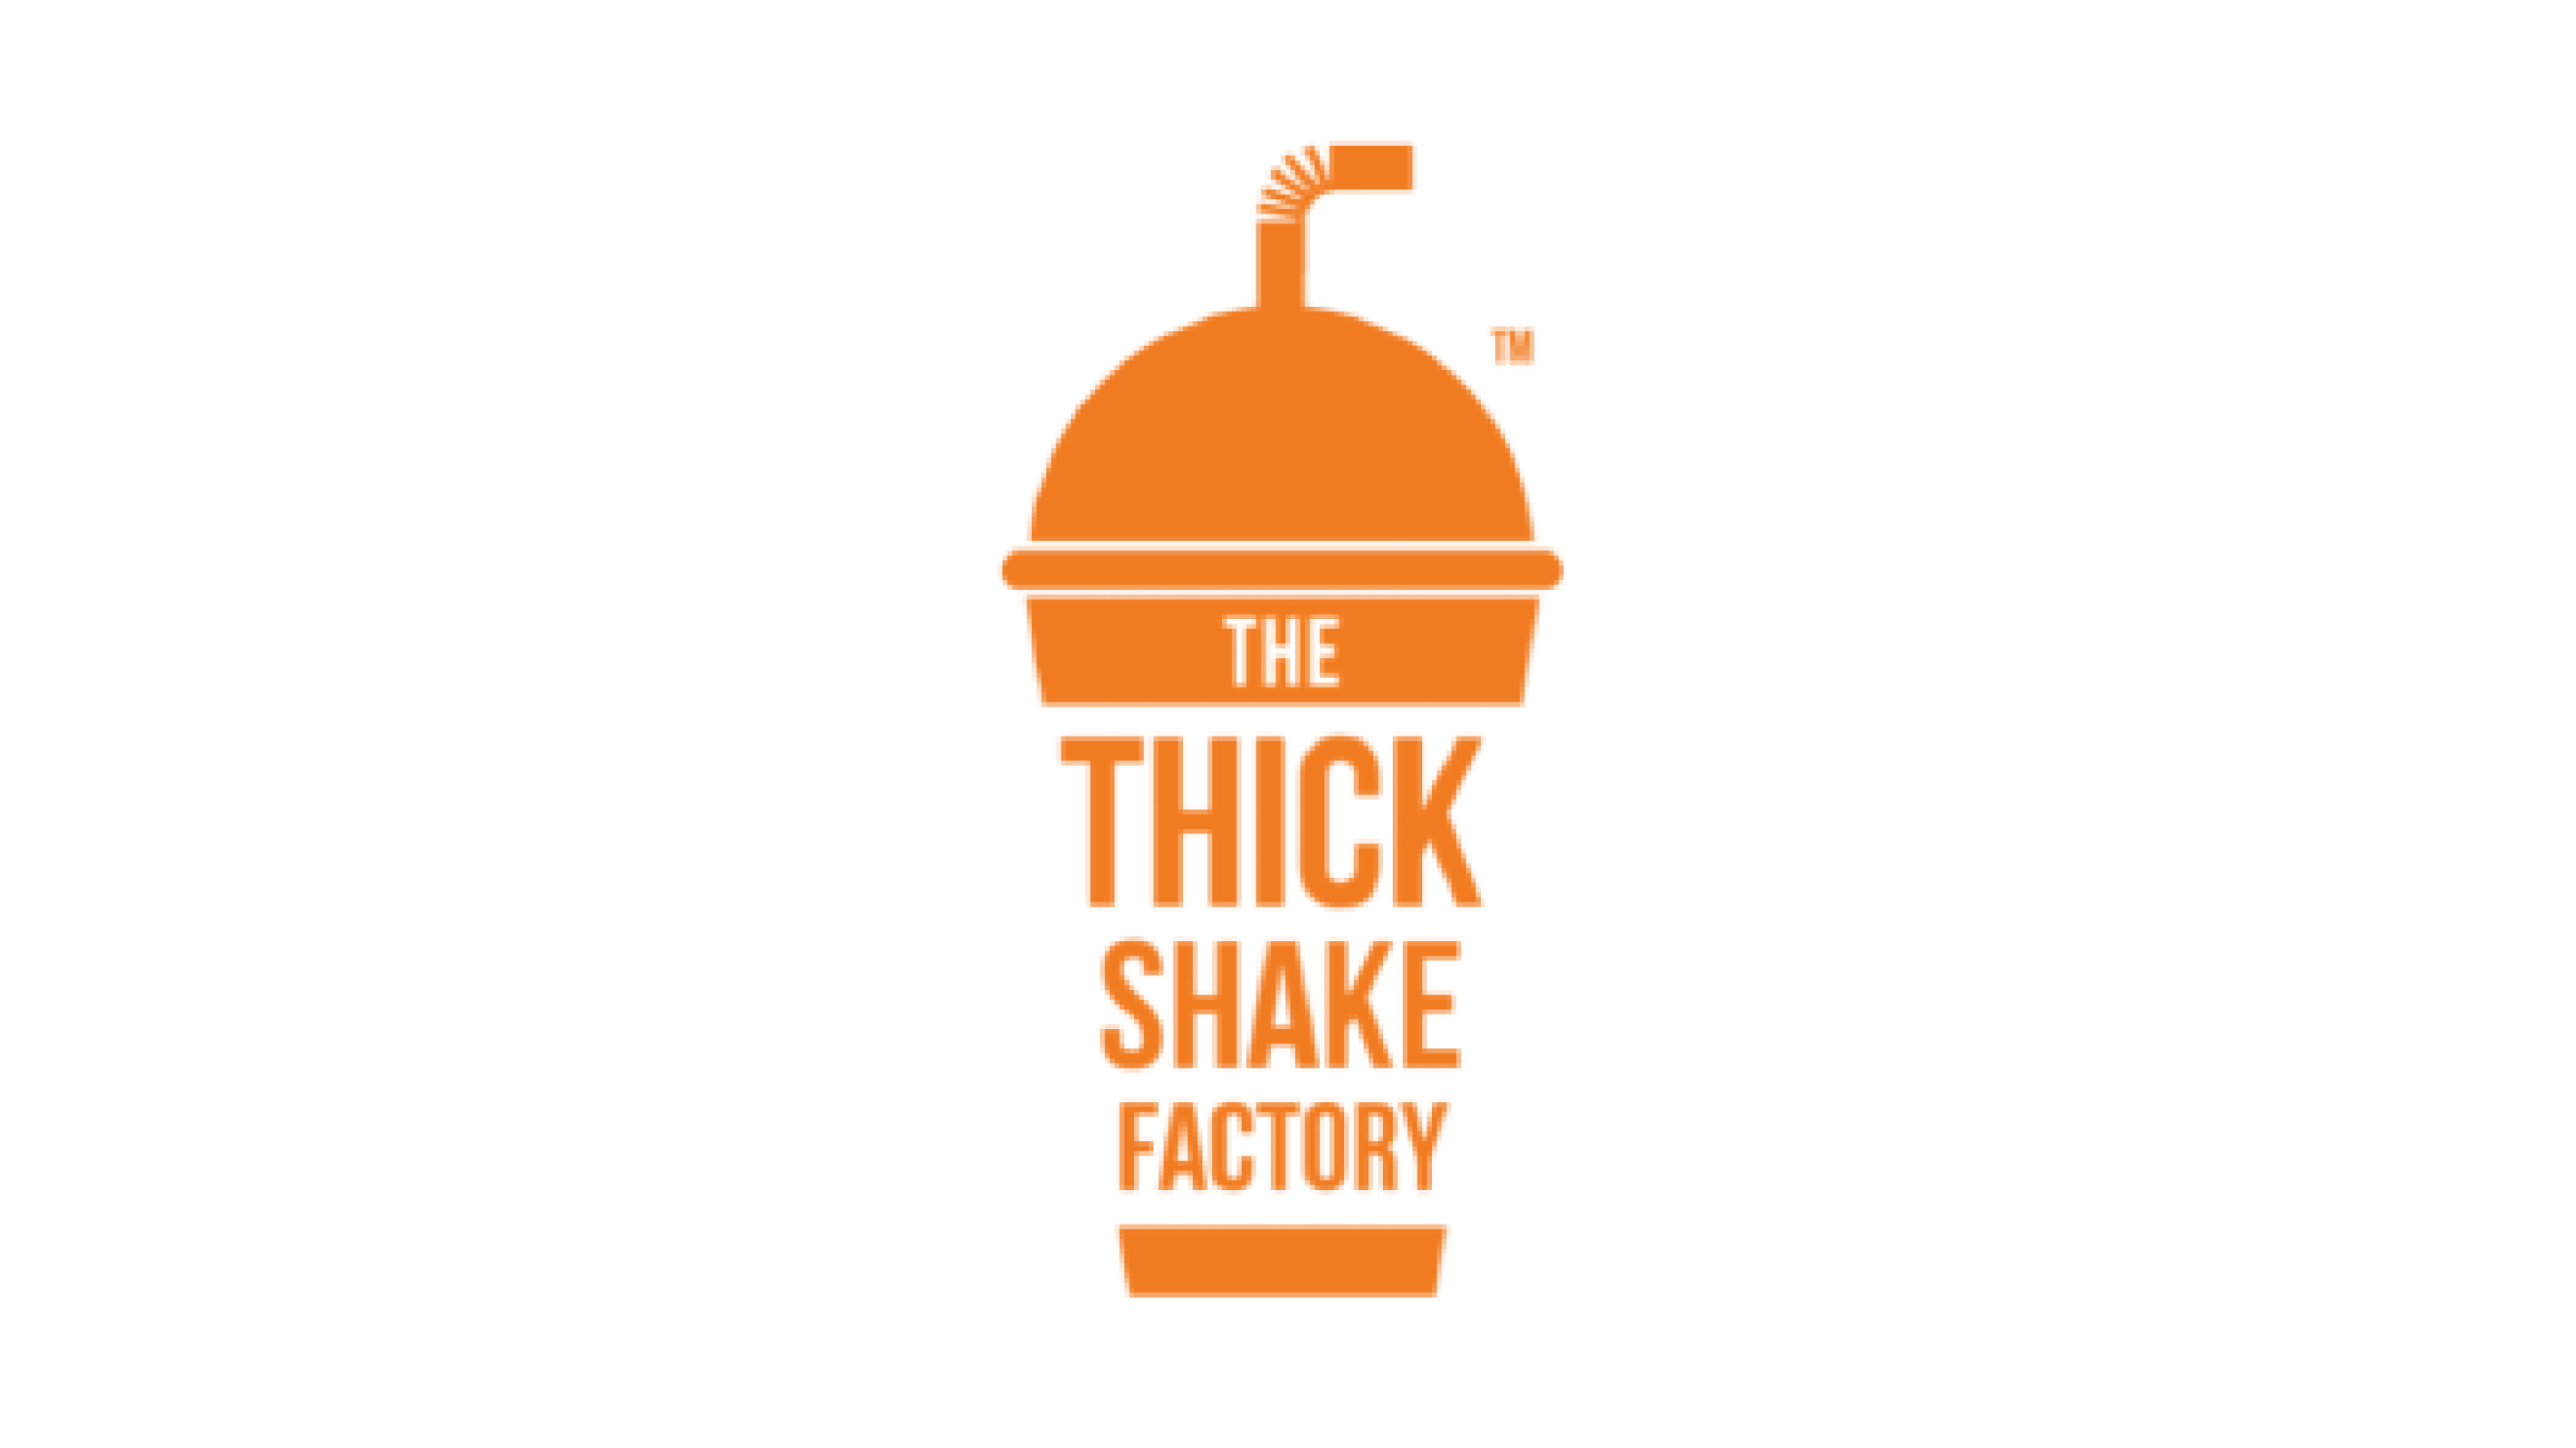 The Thick shake Factory